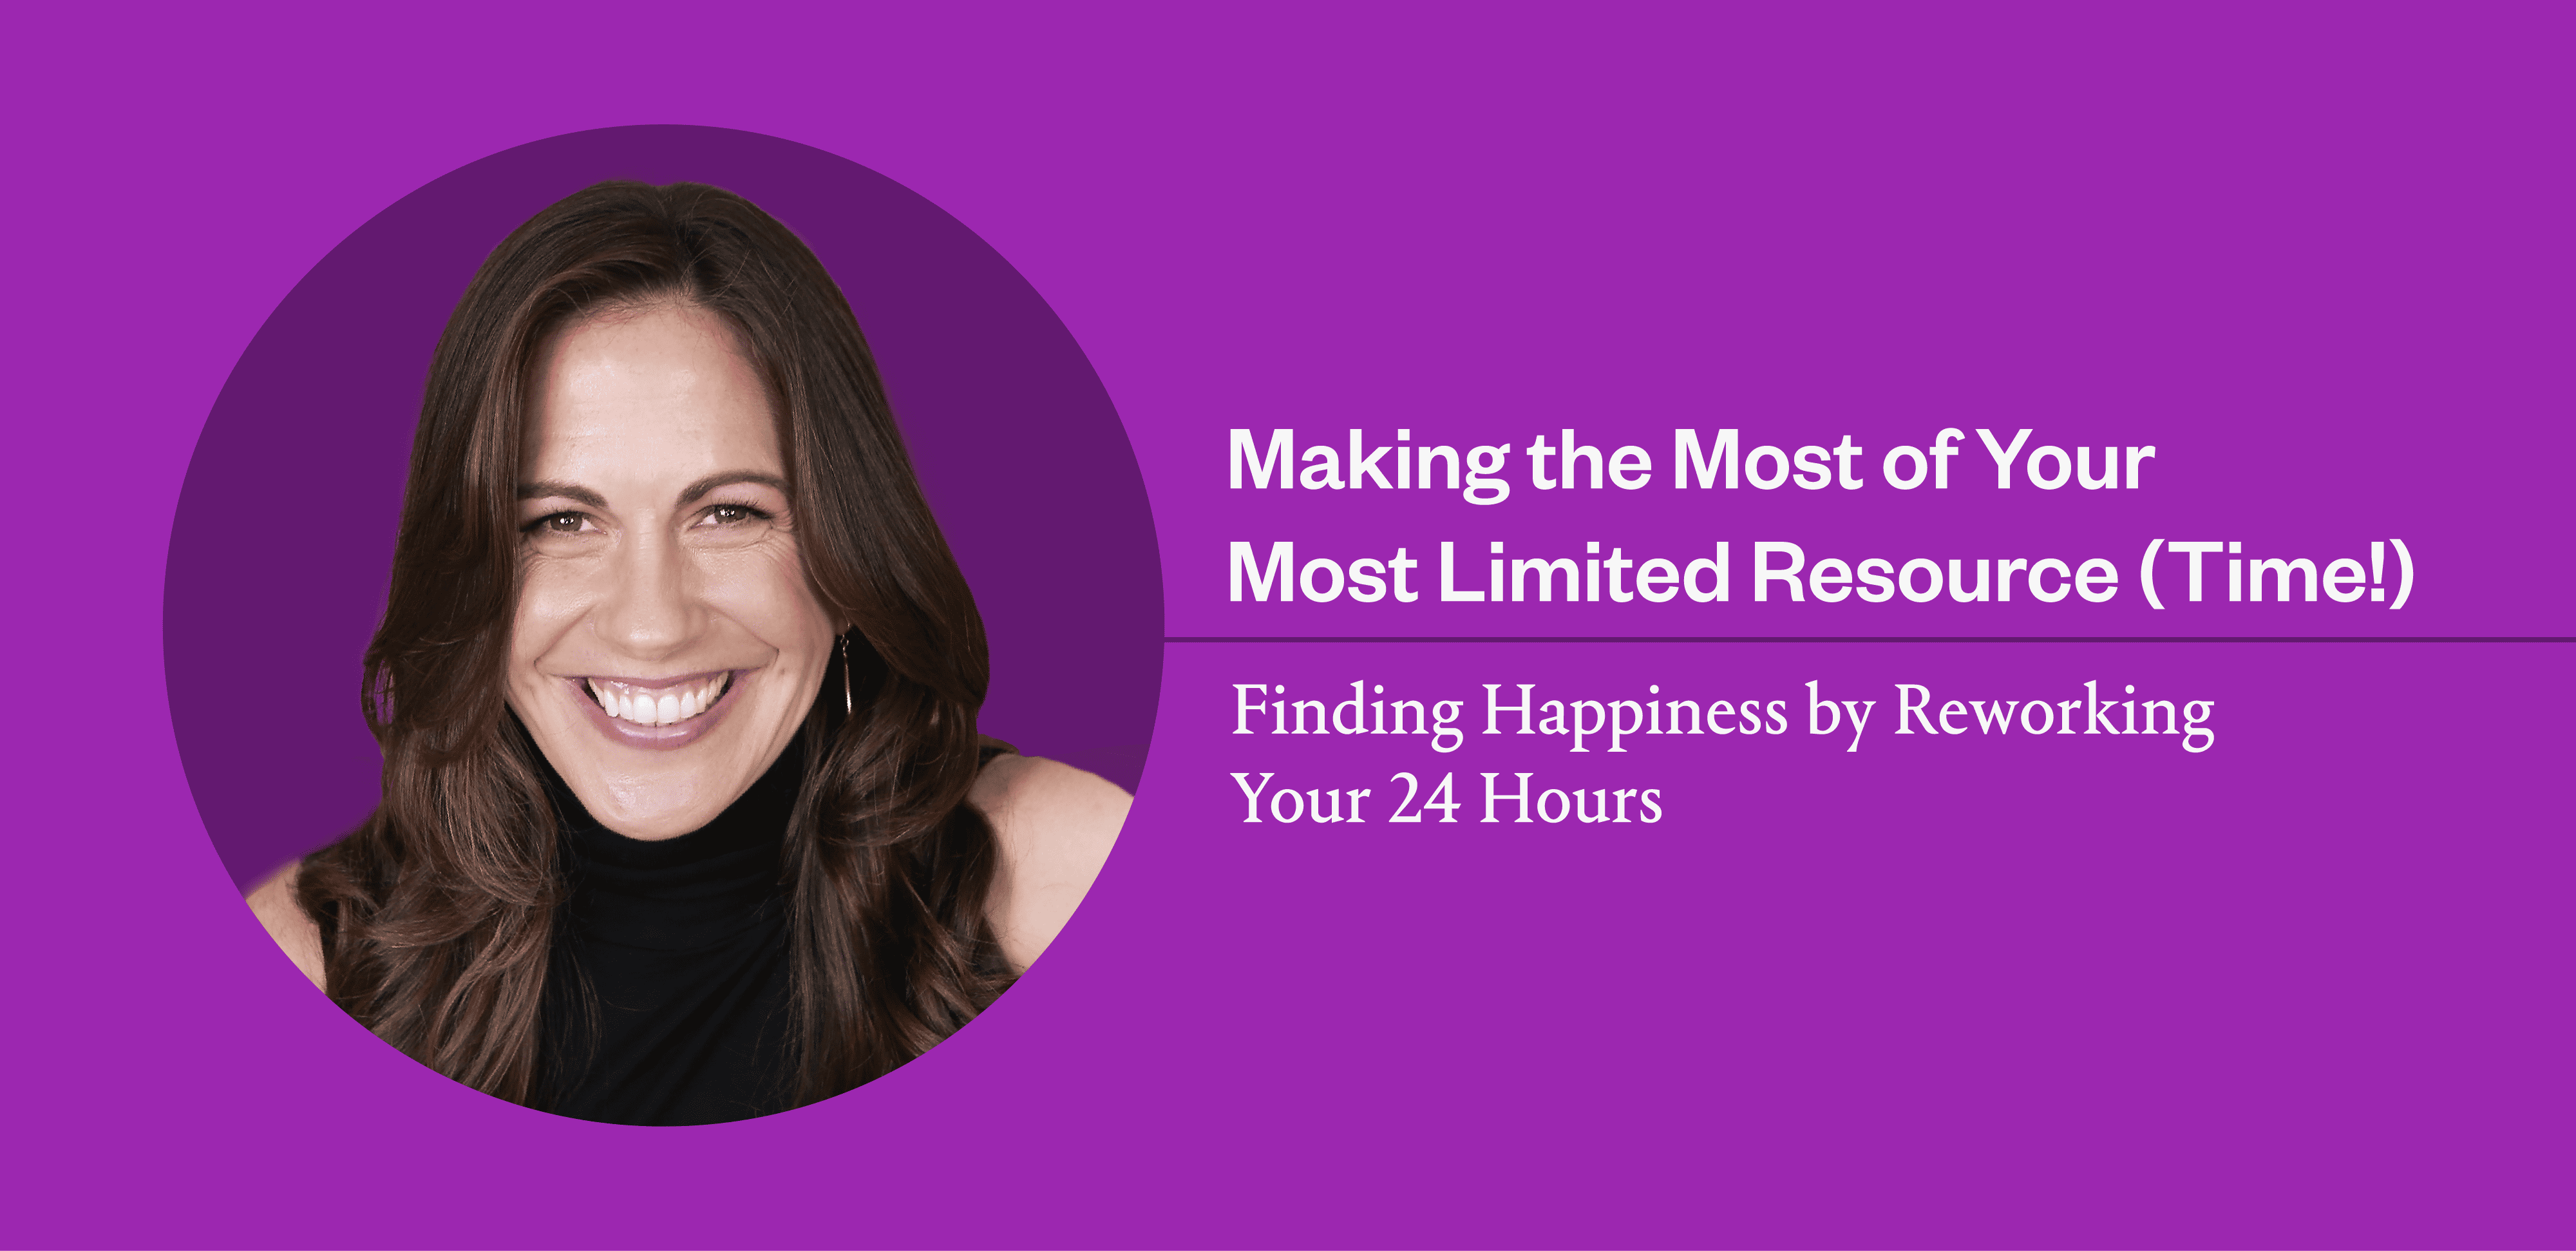 Making the Most of Your Most Limited Resource (Time!): Bestselling Author Cassie Holmes